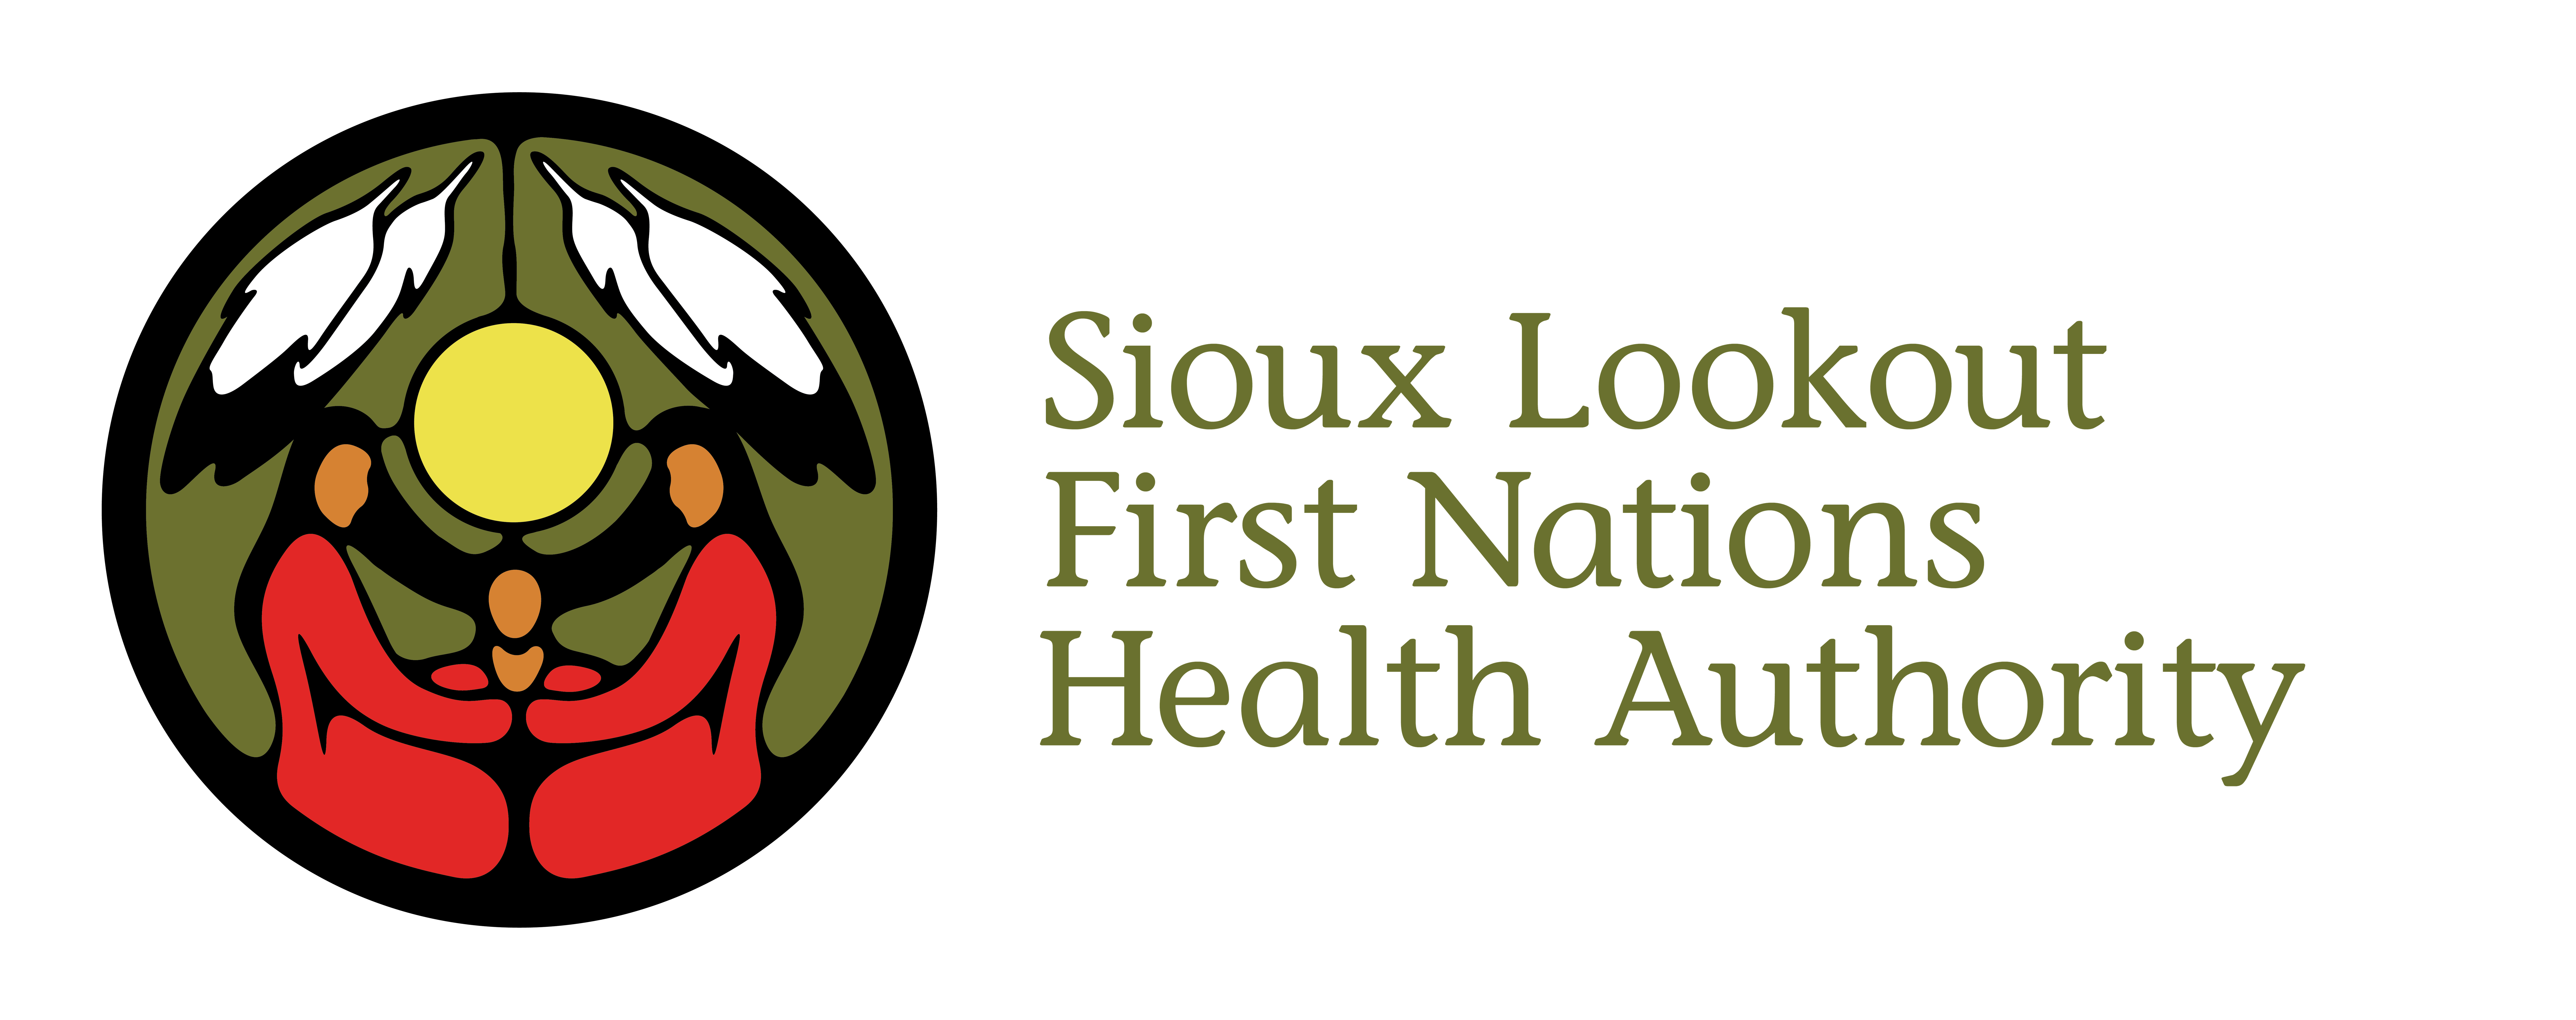 Sioux Lookout First Nations Health Authority Logo